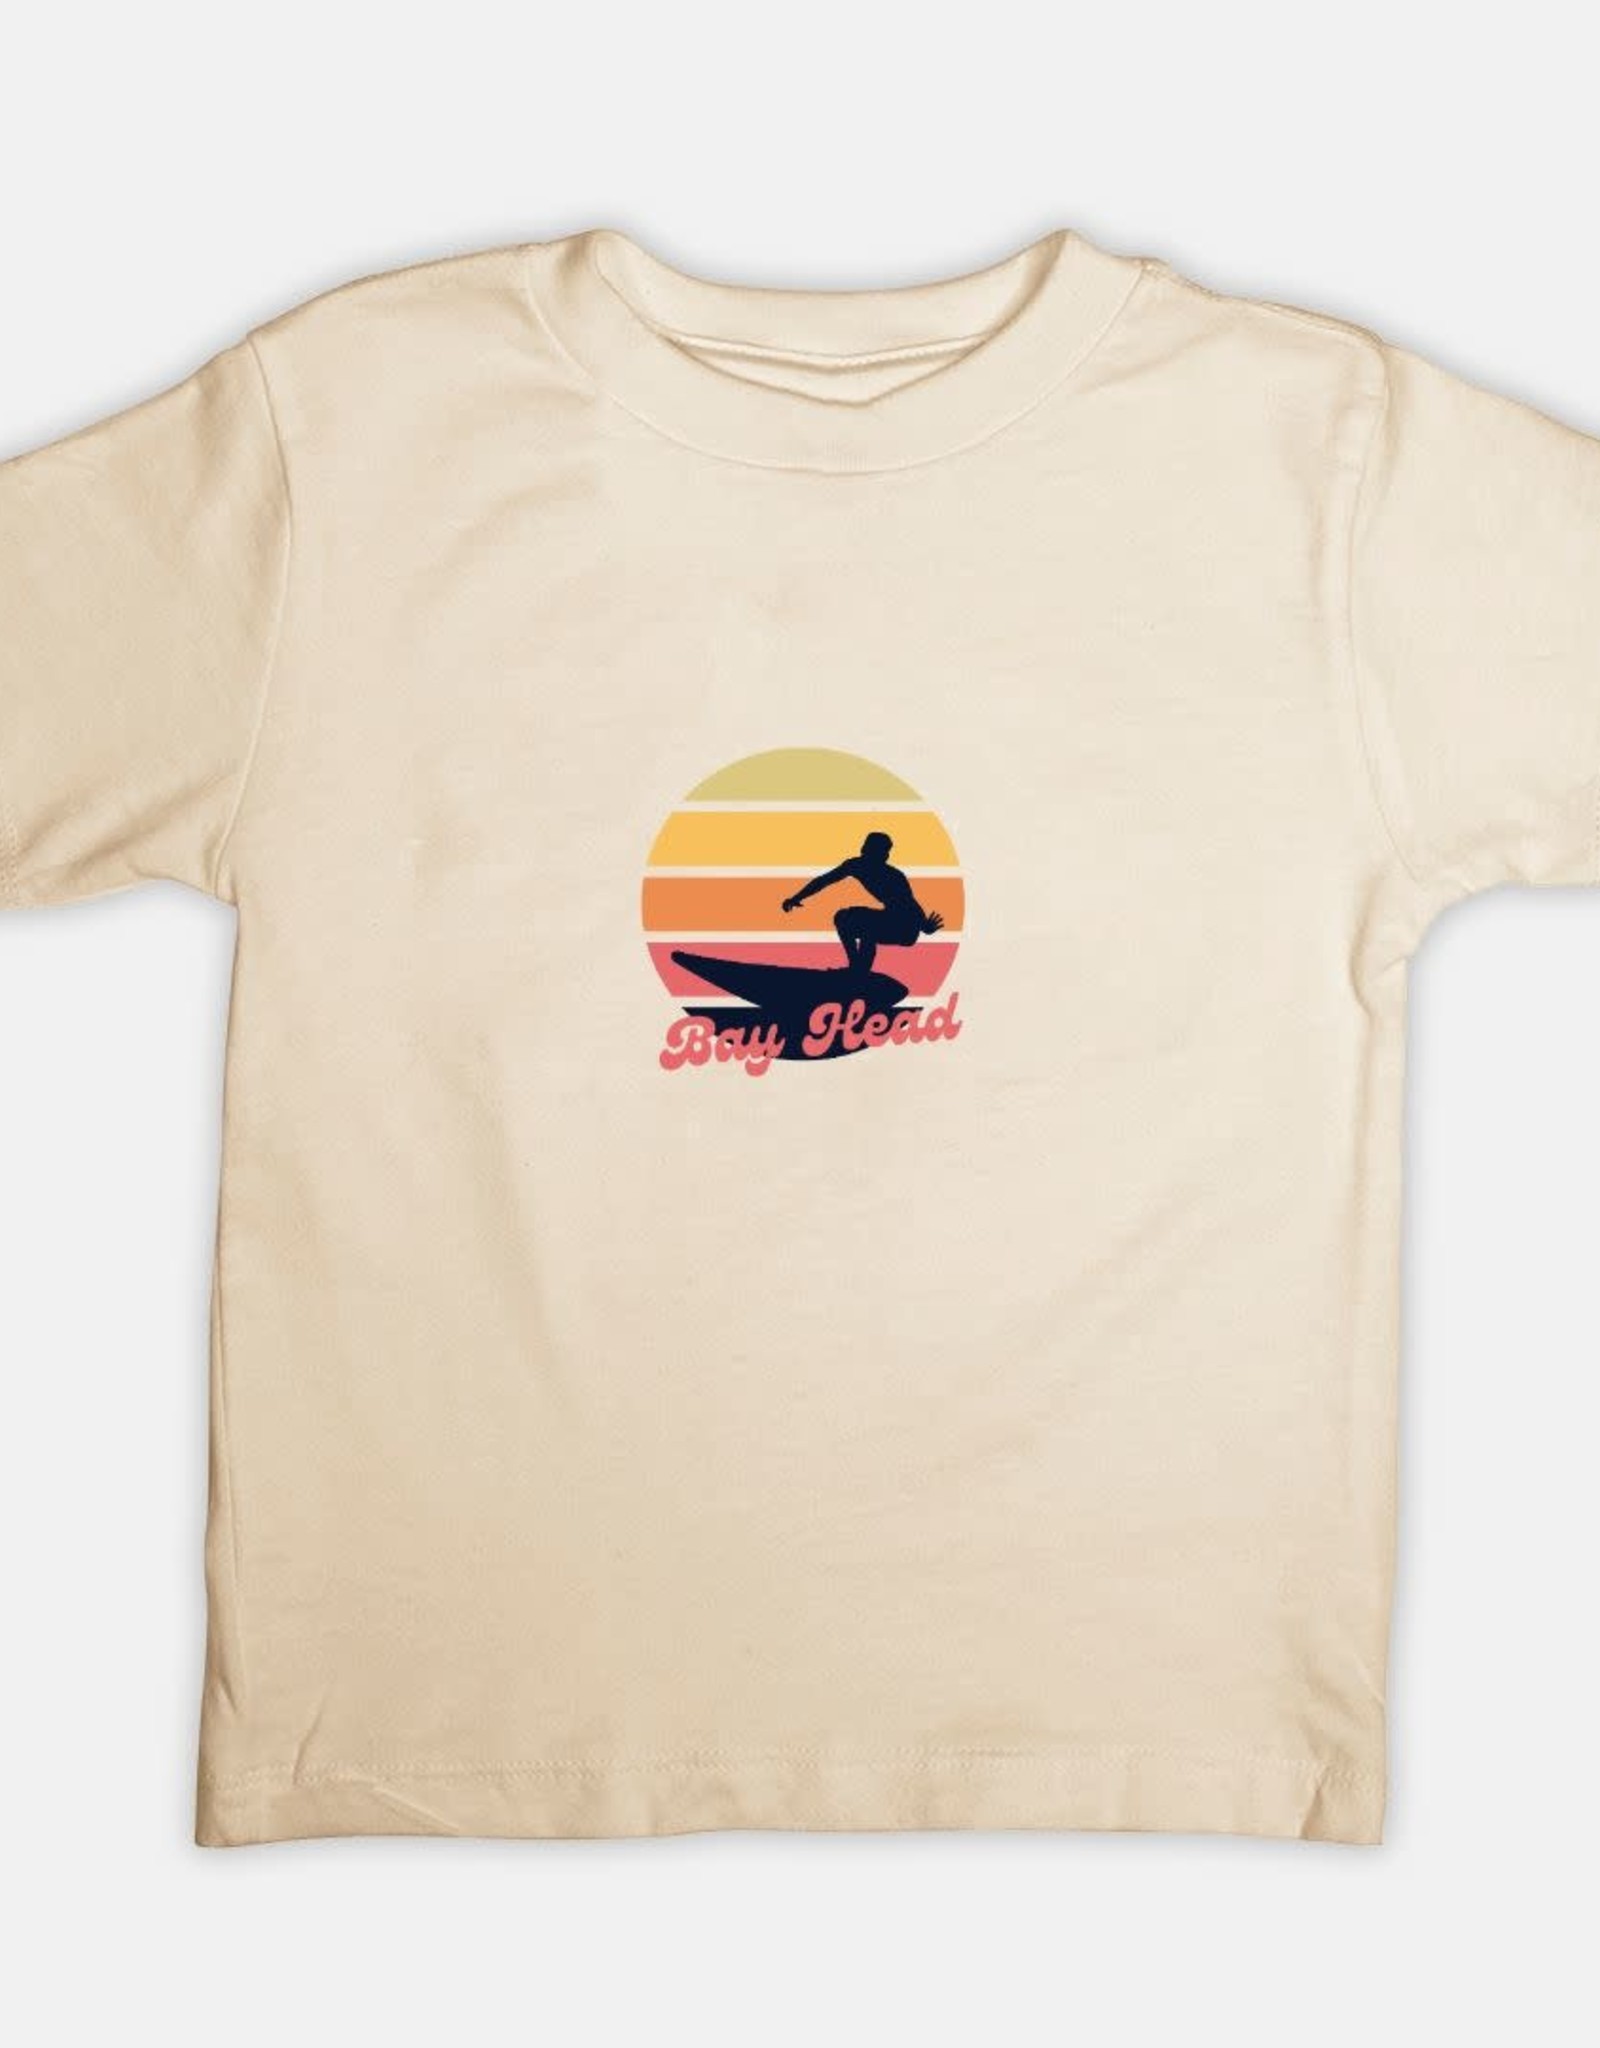 Surf's Up Toddler Tee